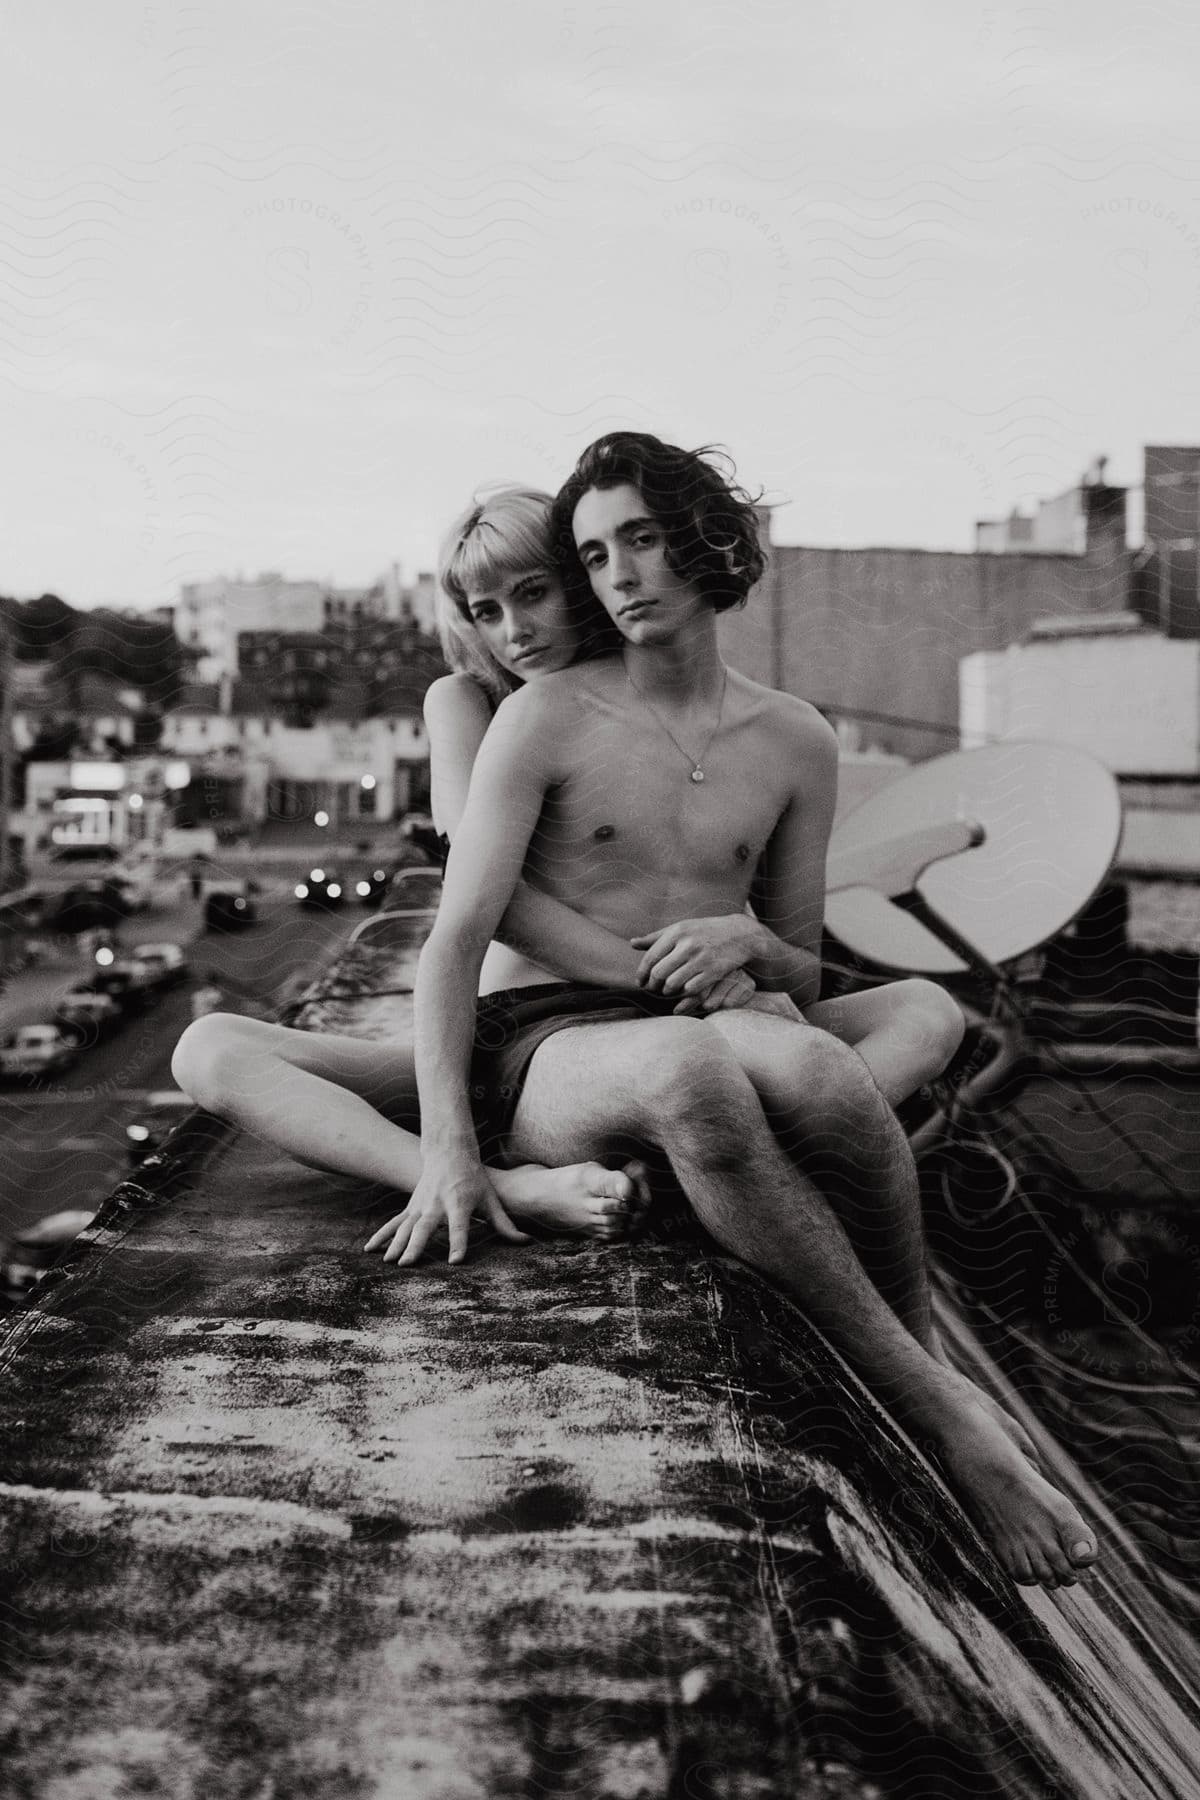 Stock photo of a man and woman sit on a rooftop posing for the camera with a city street in the background